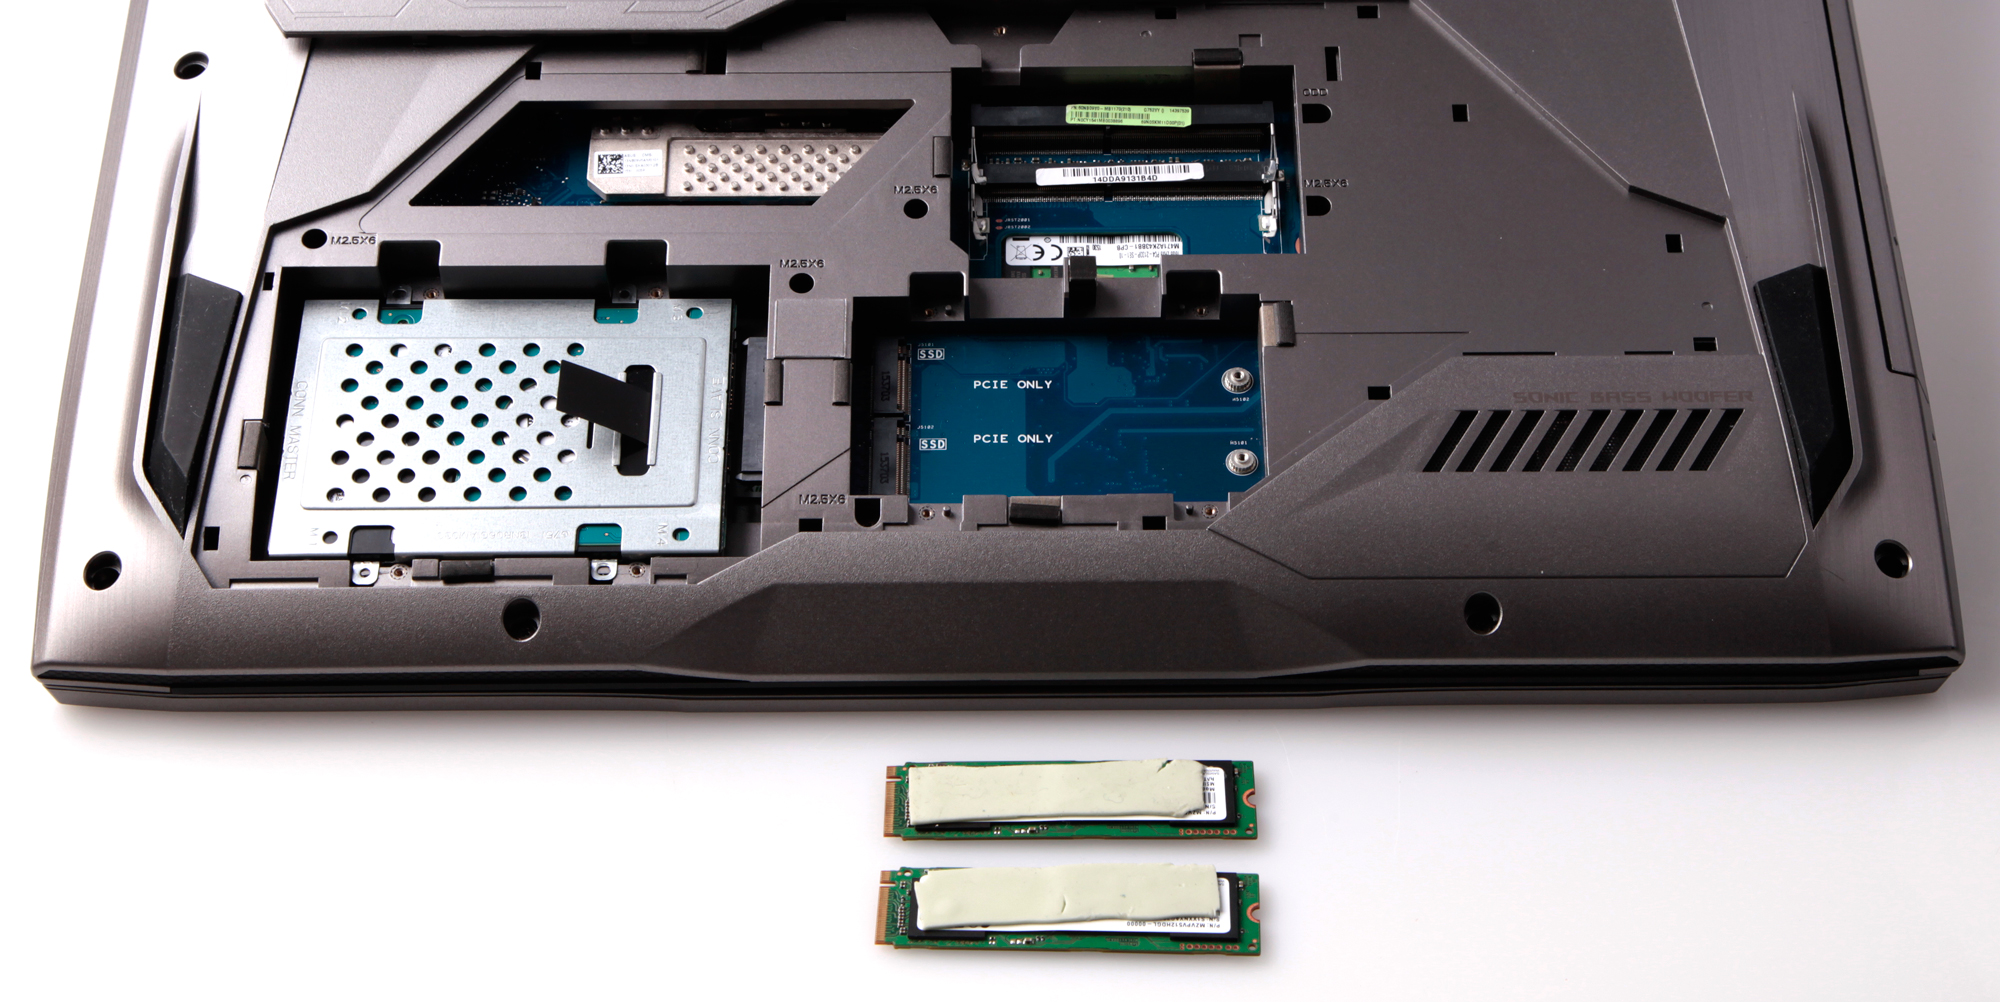 SSD Drive Holder for Wise